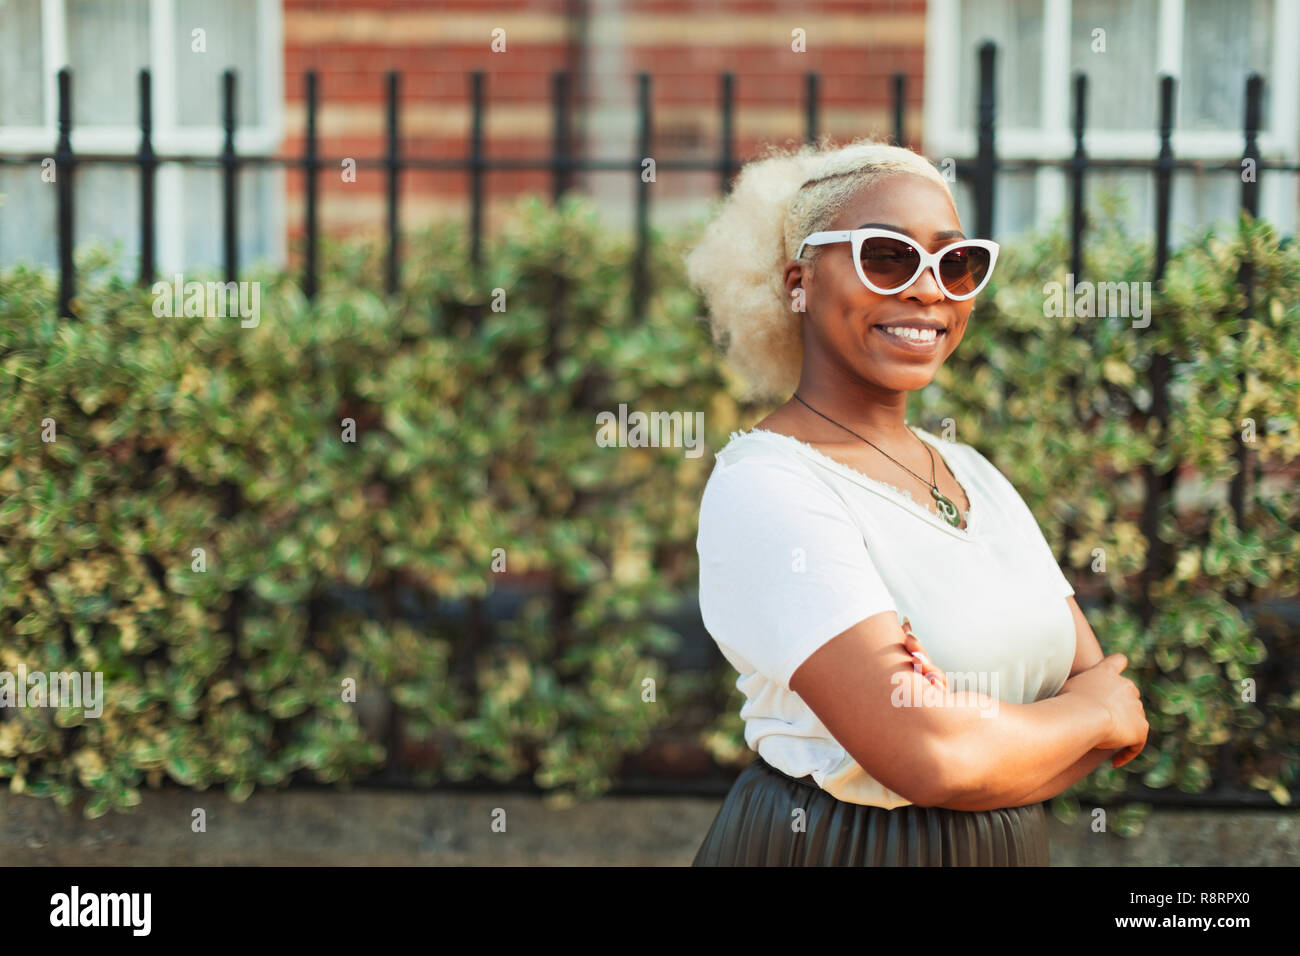 Portrait smiling, confident young woman in sunglasses on urban sidewalk Stock Photo